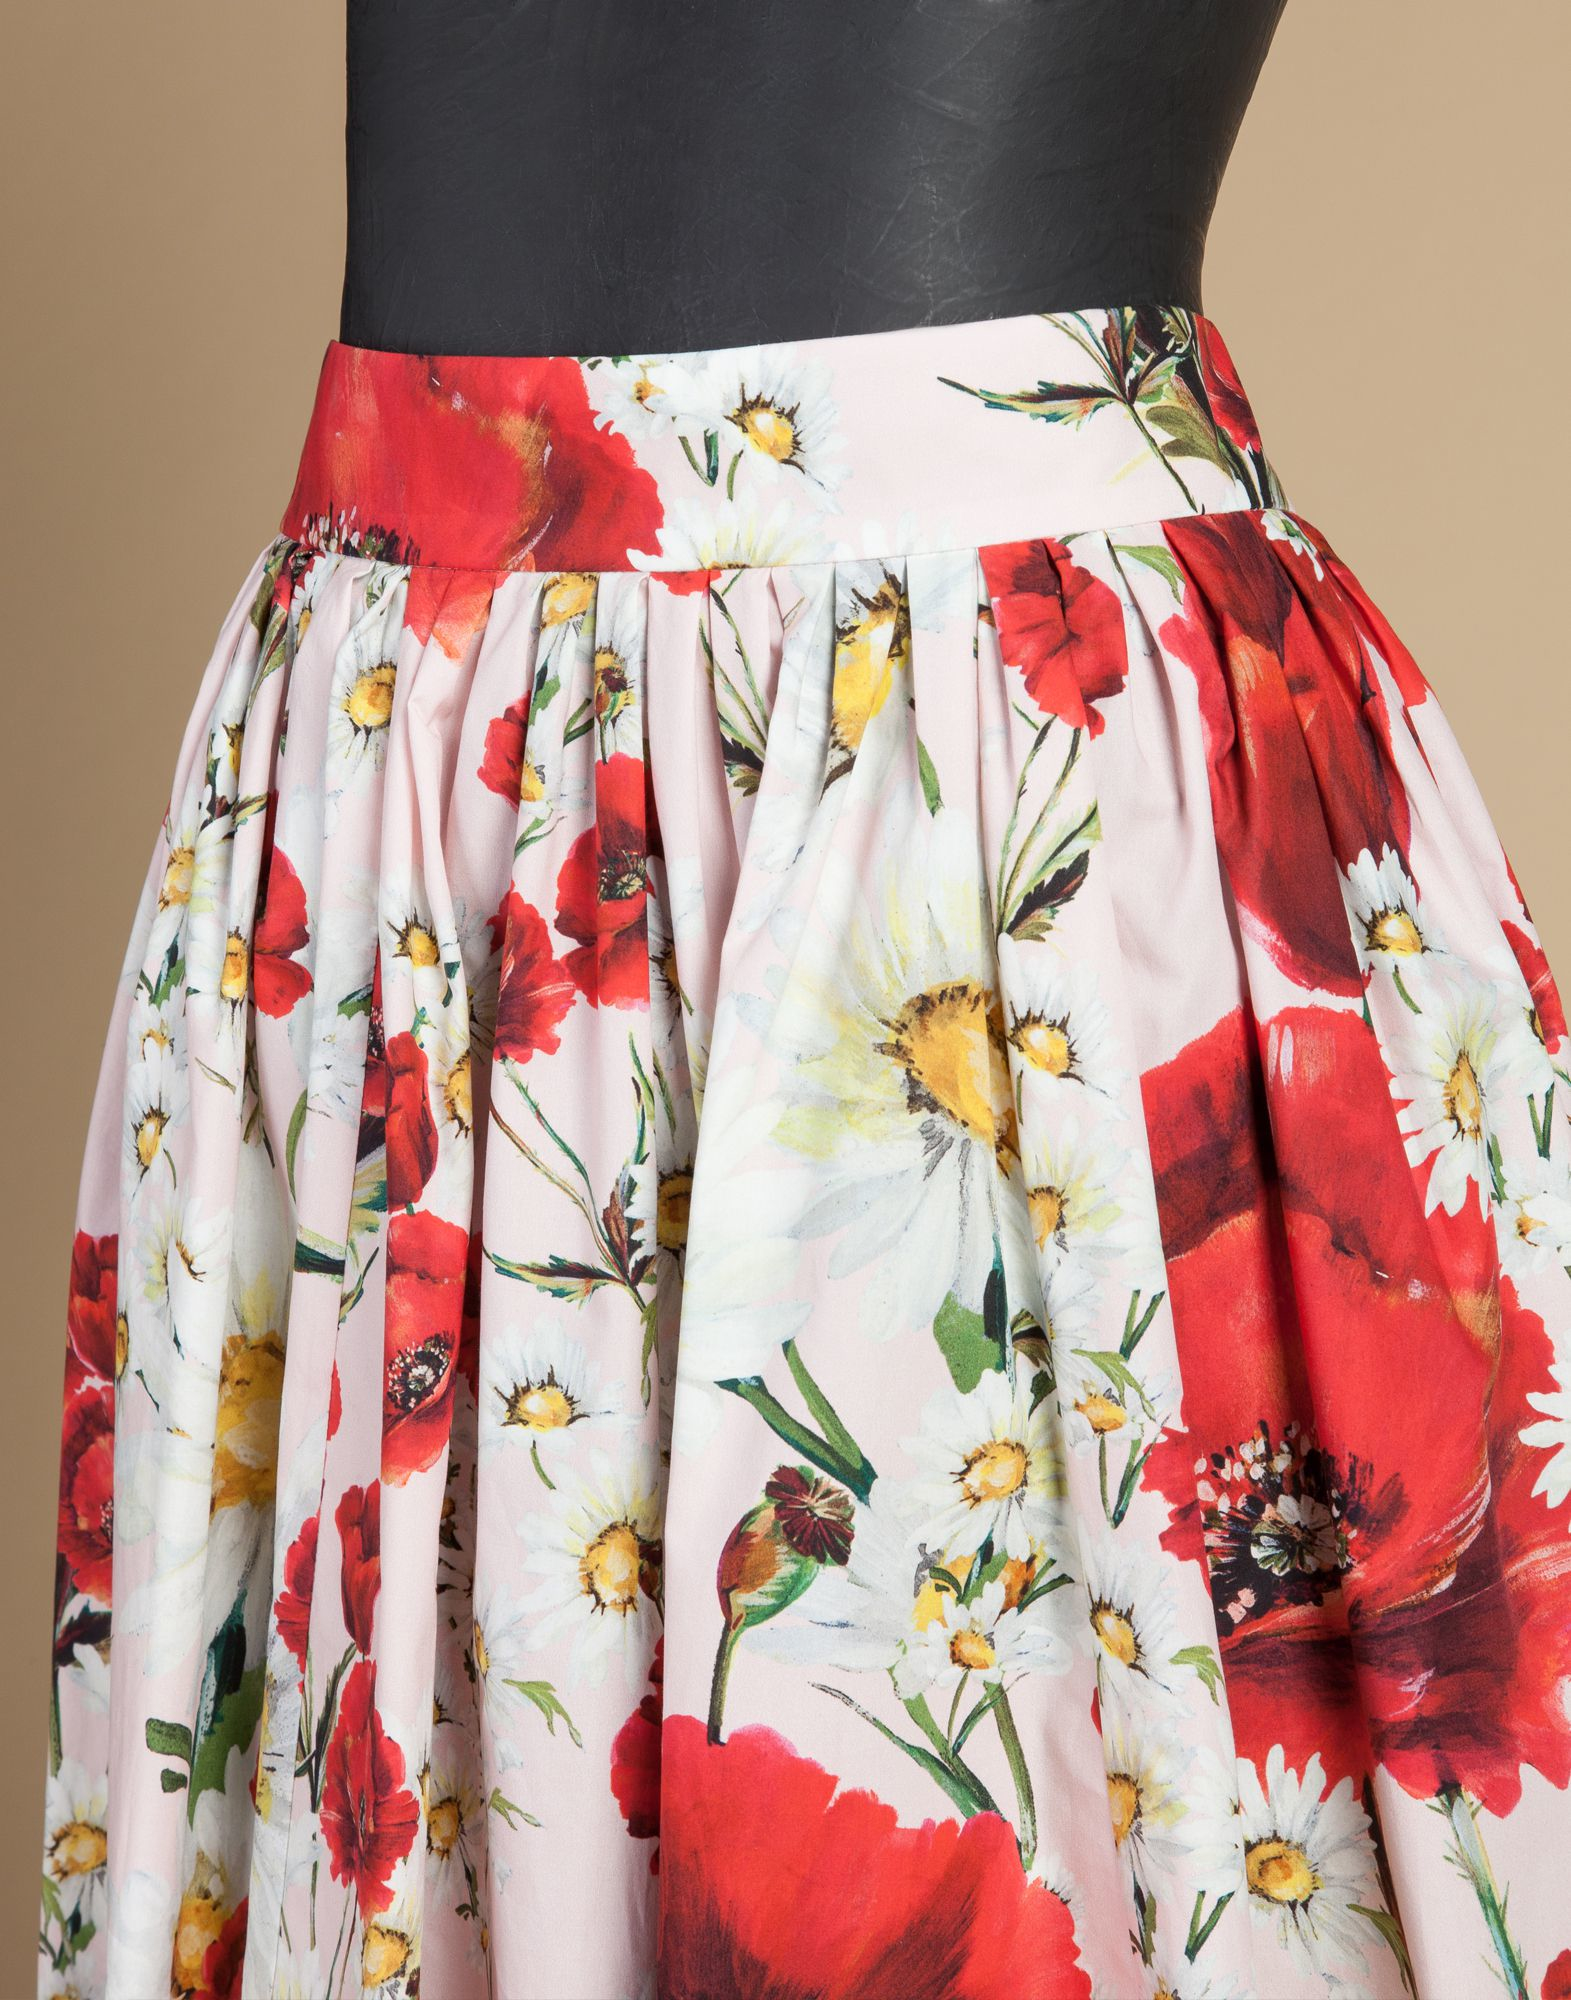 Lyst - Dolce & gabbana Circle Skirt In Printed Cotton in Pink